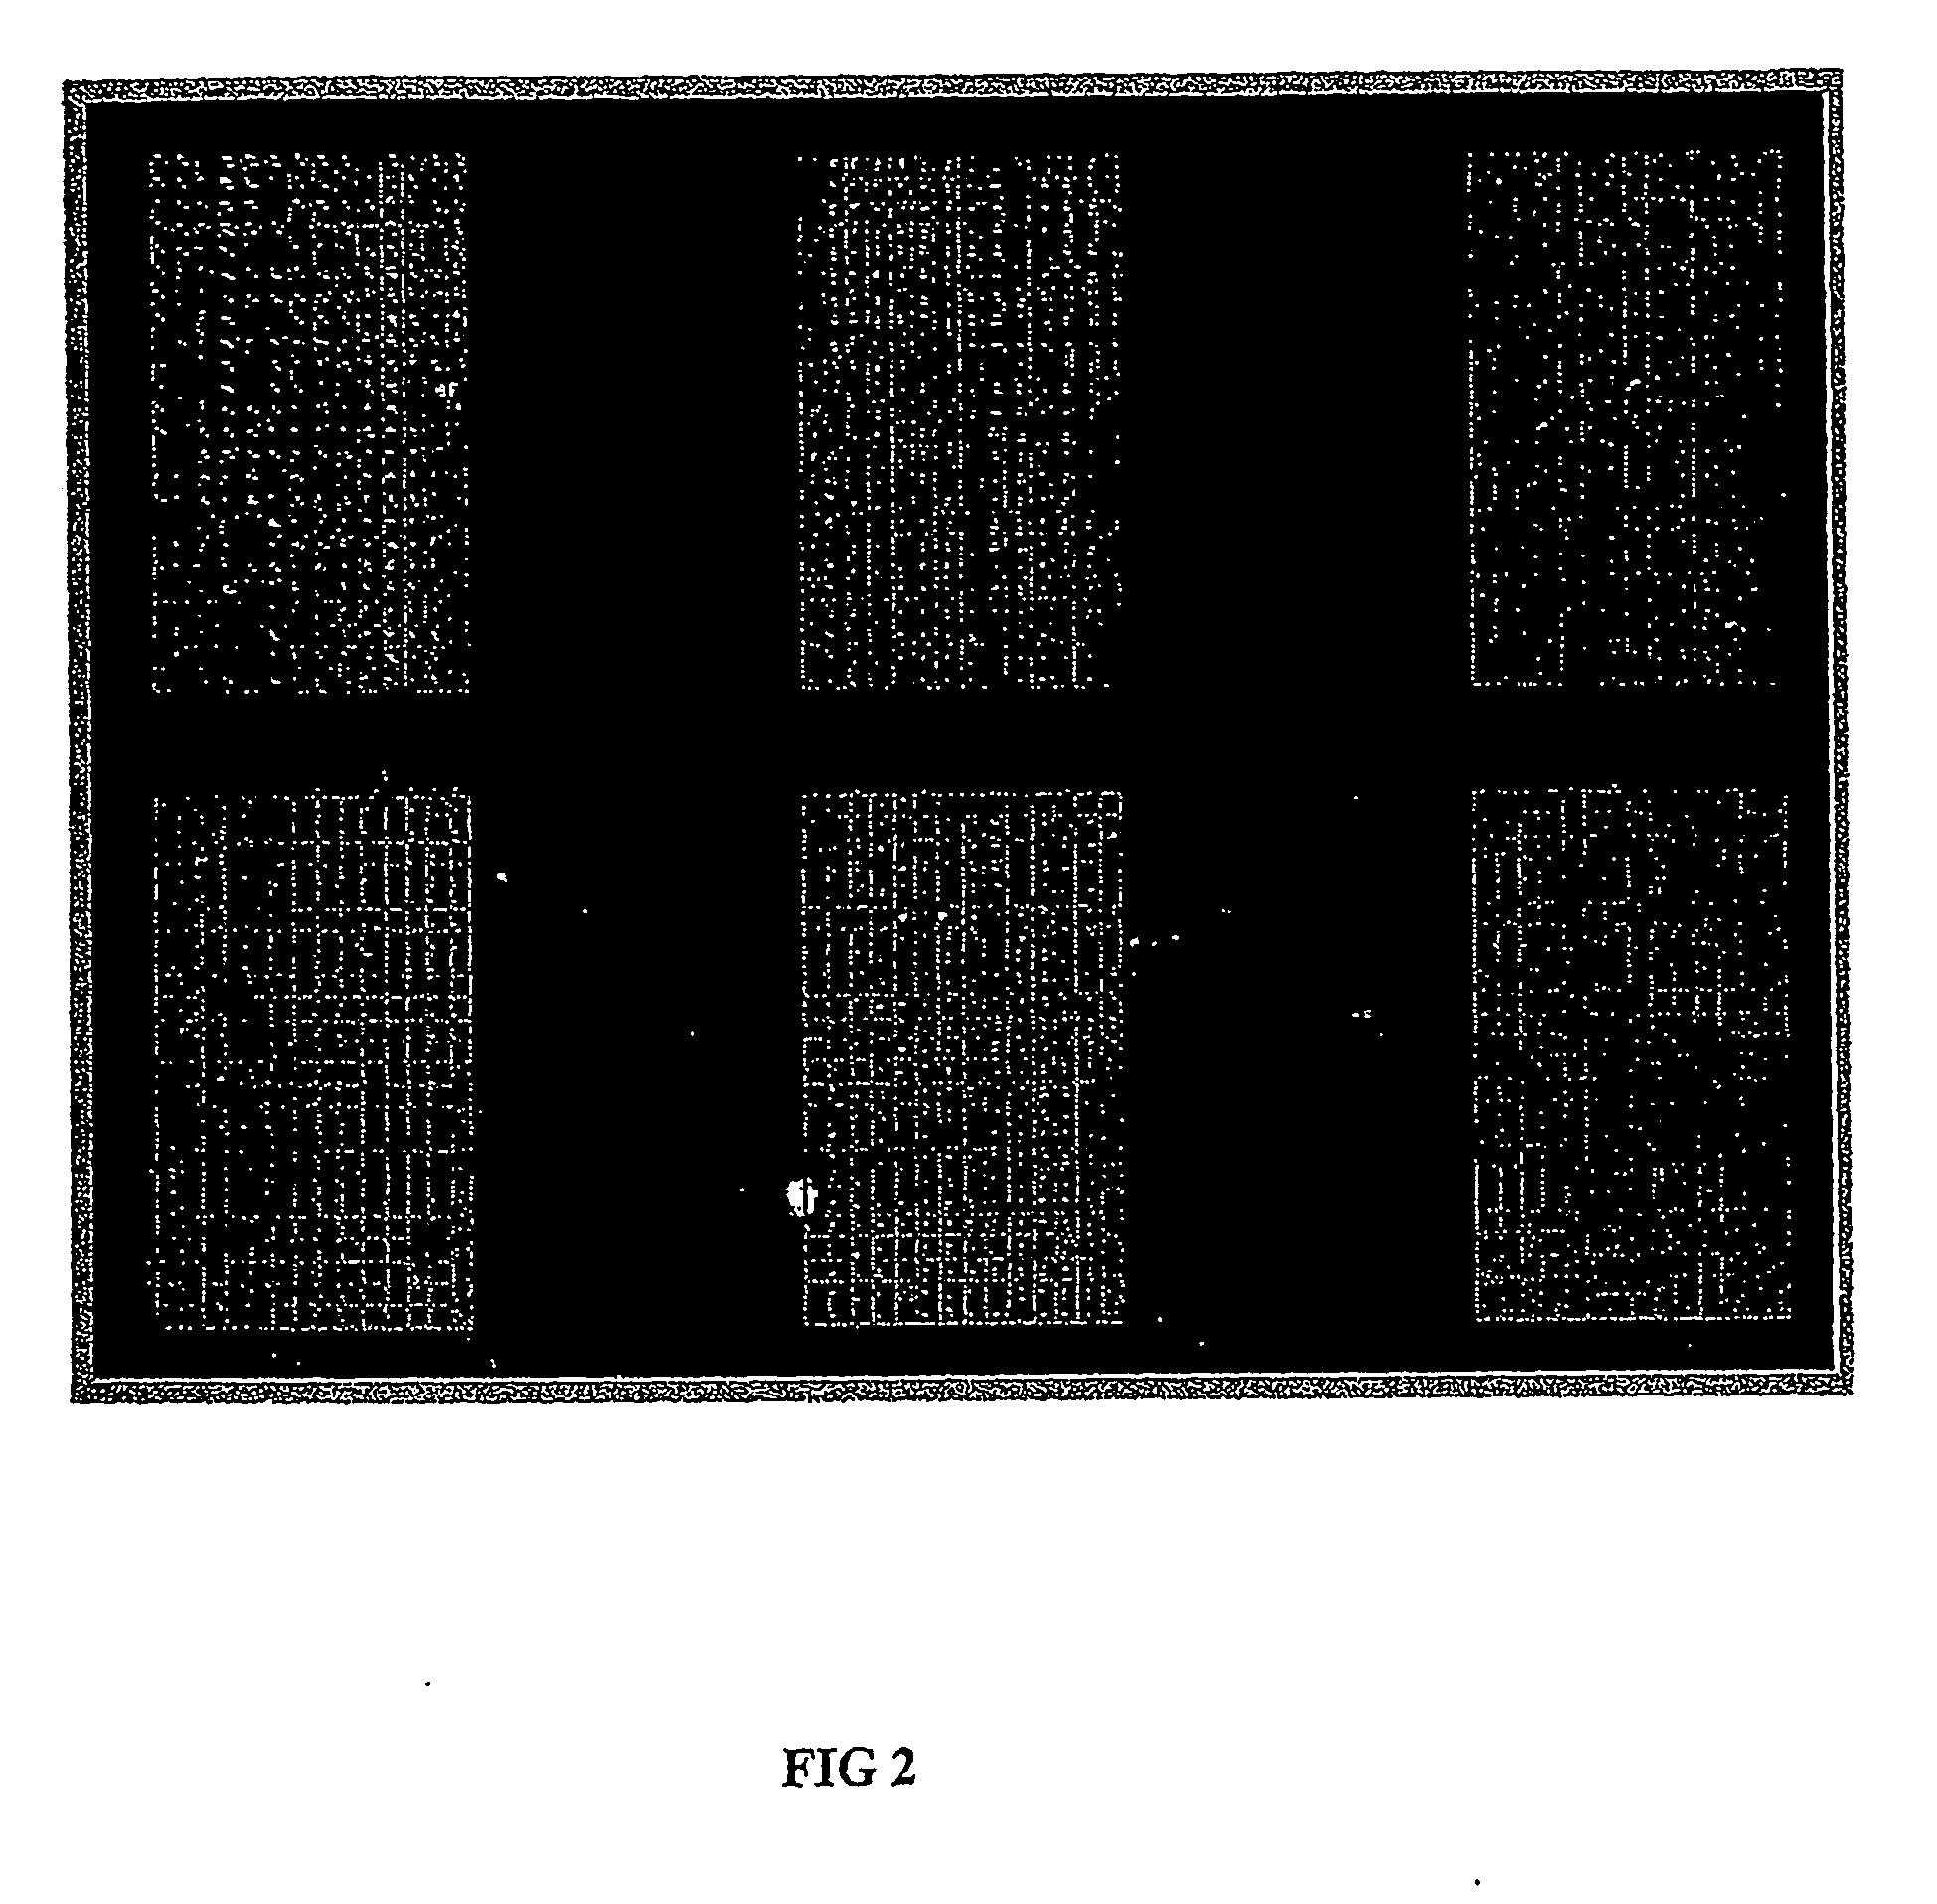 Method and system for automatic vision inspection and classification of microarray slides